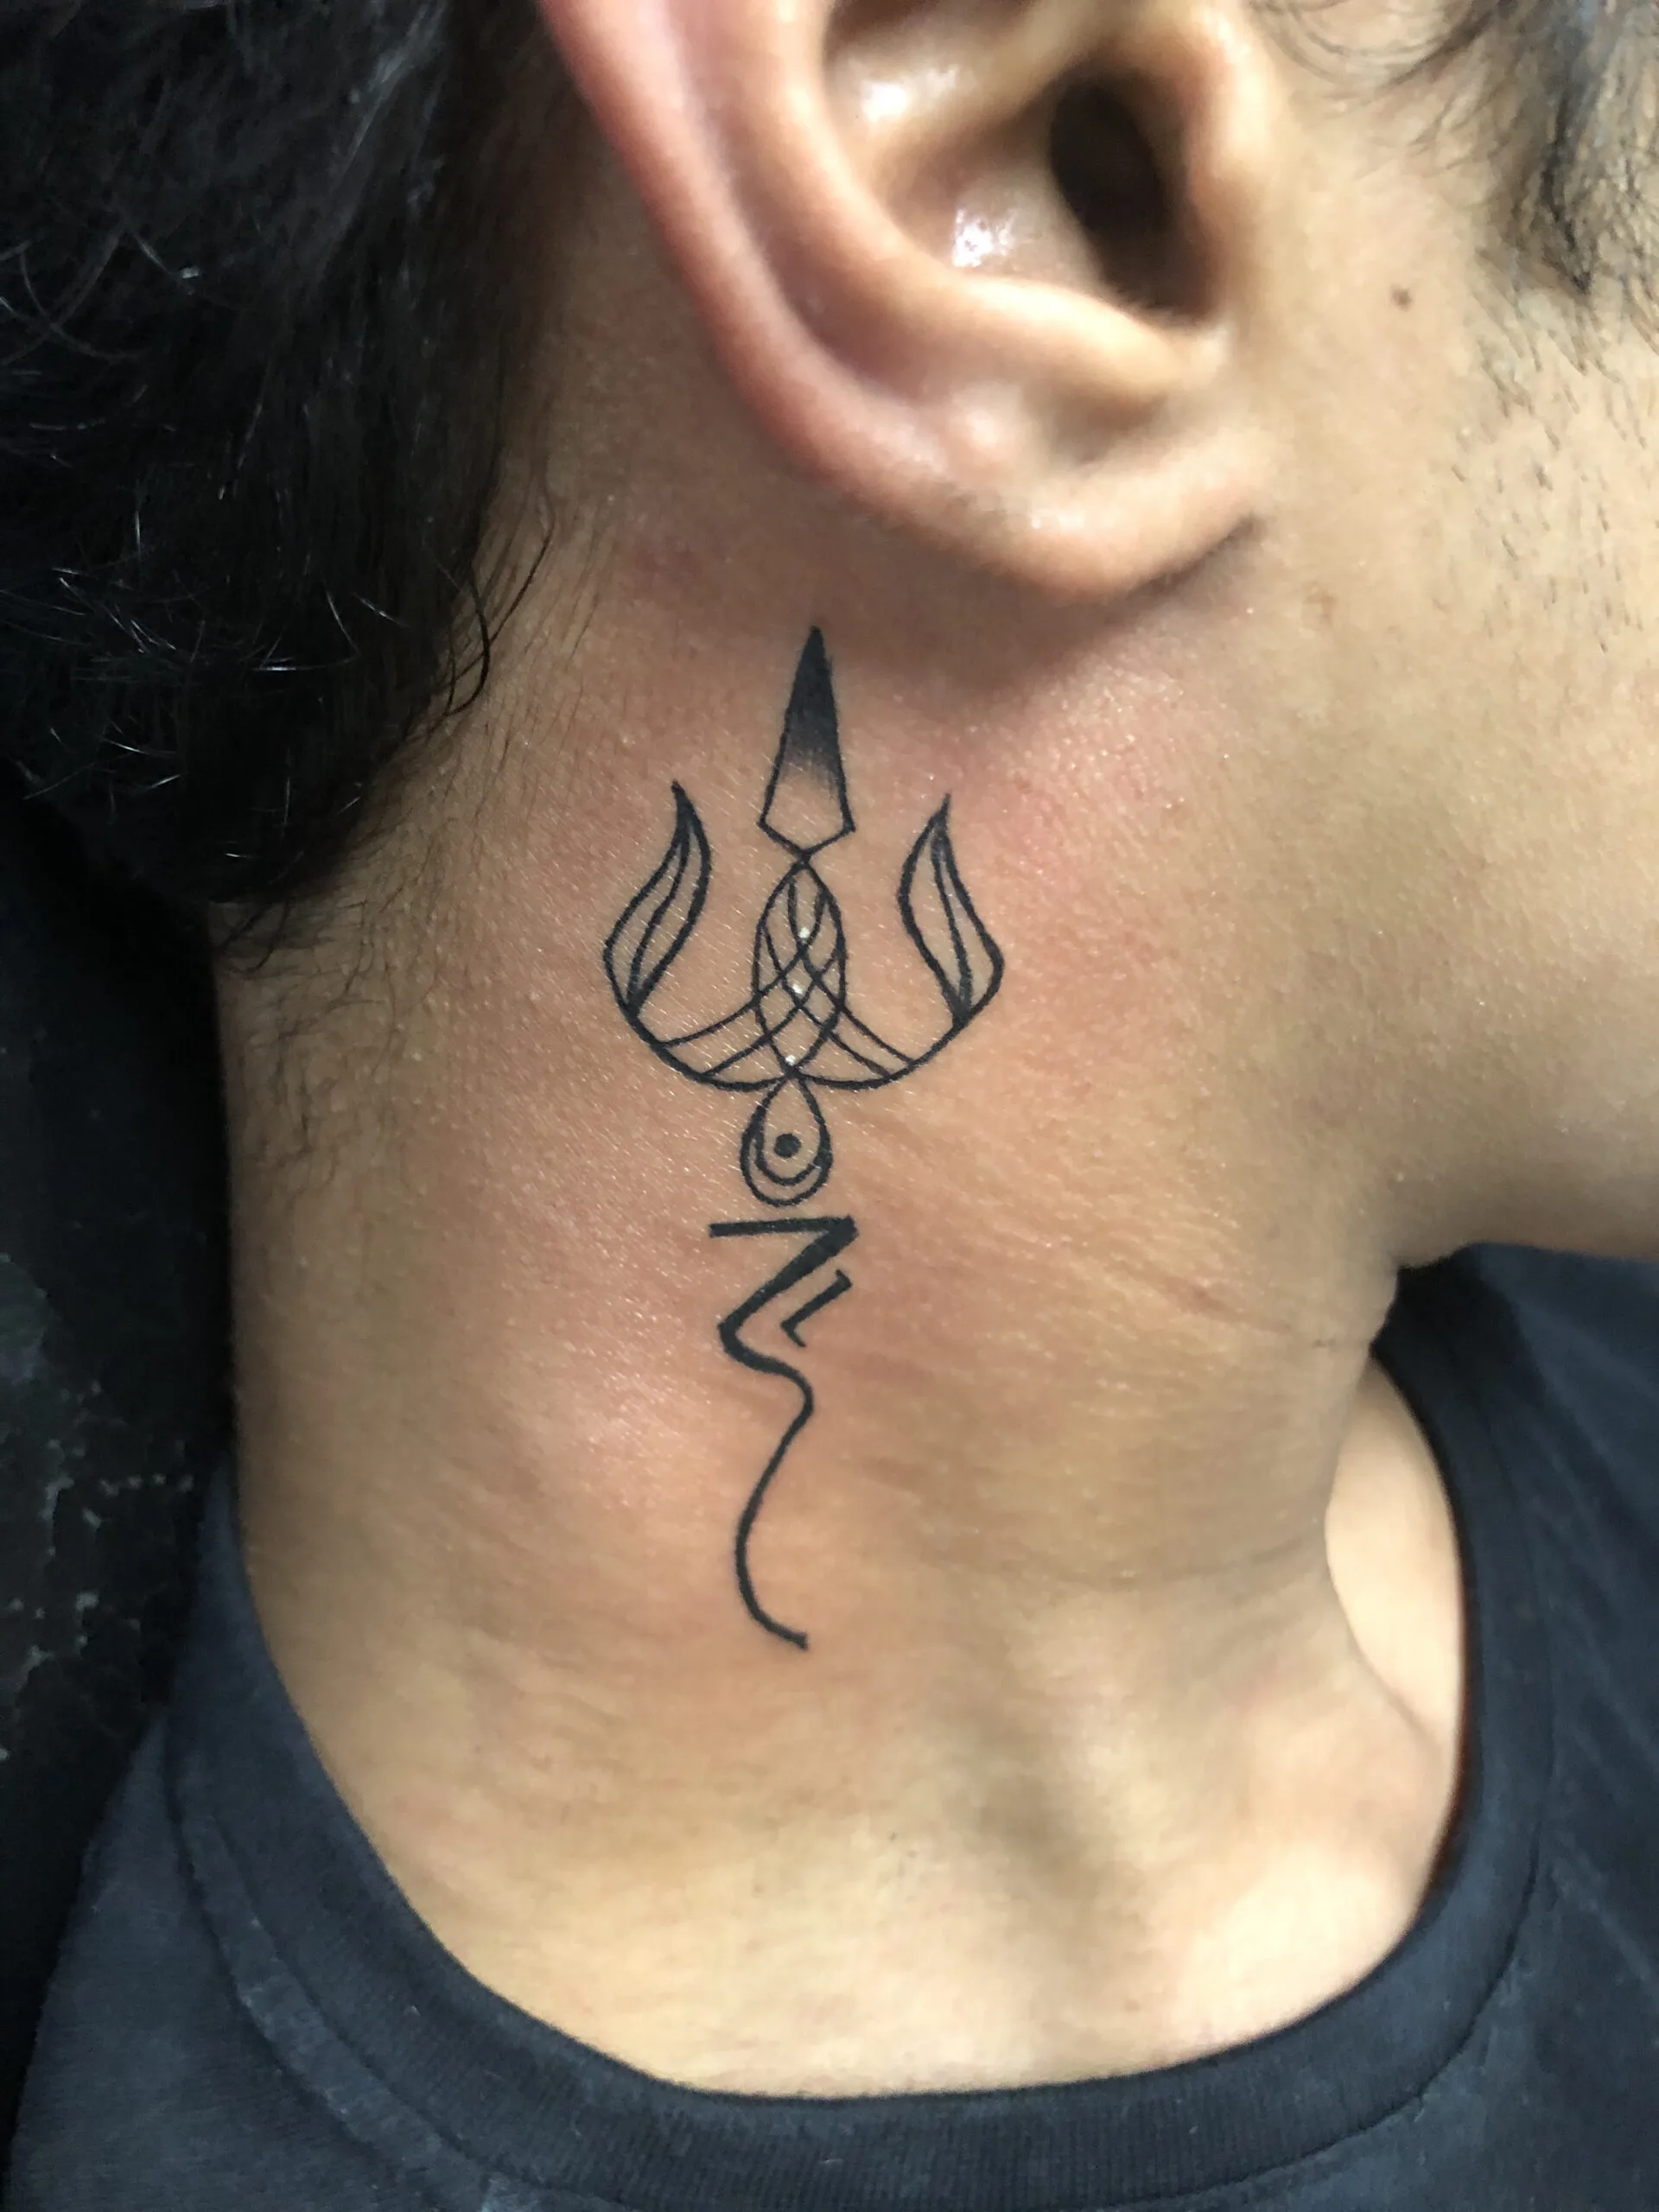 Shiva band tattoo, For Parlour at Rs 499/inch in Bengaluru | ID: 21989323862